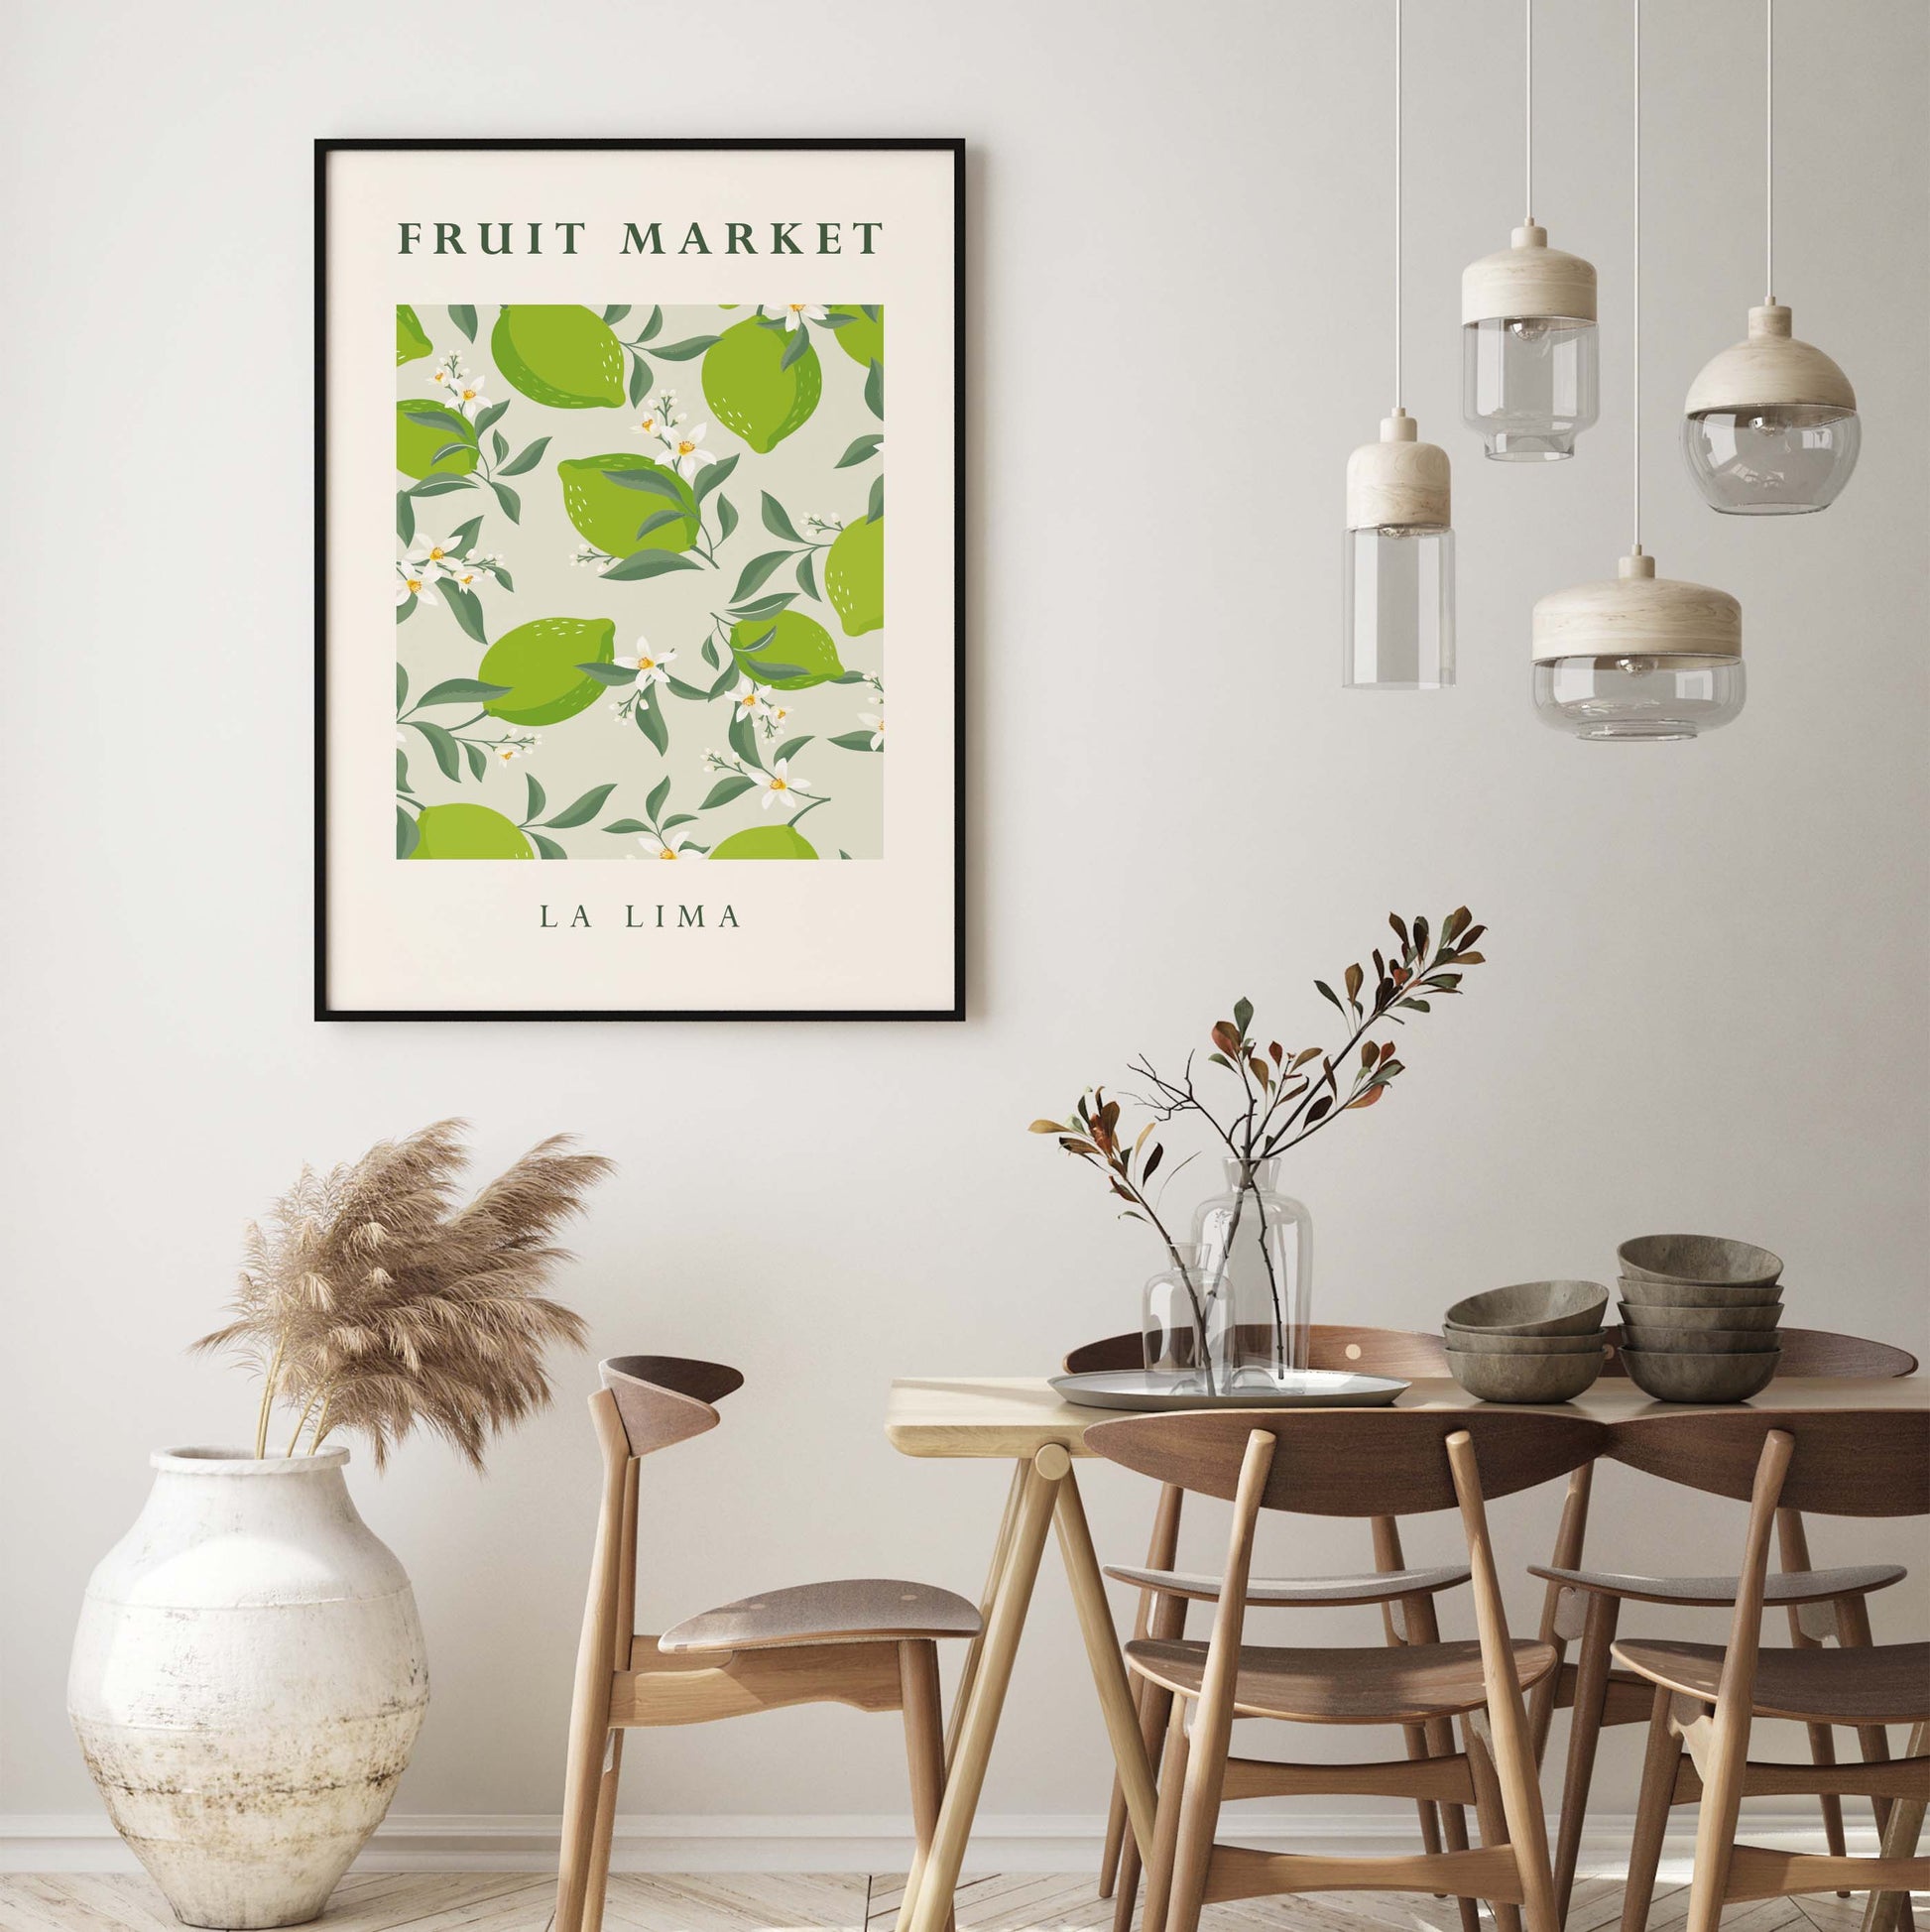 Fruit market print for the kitchen in a lime green design